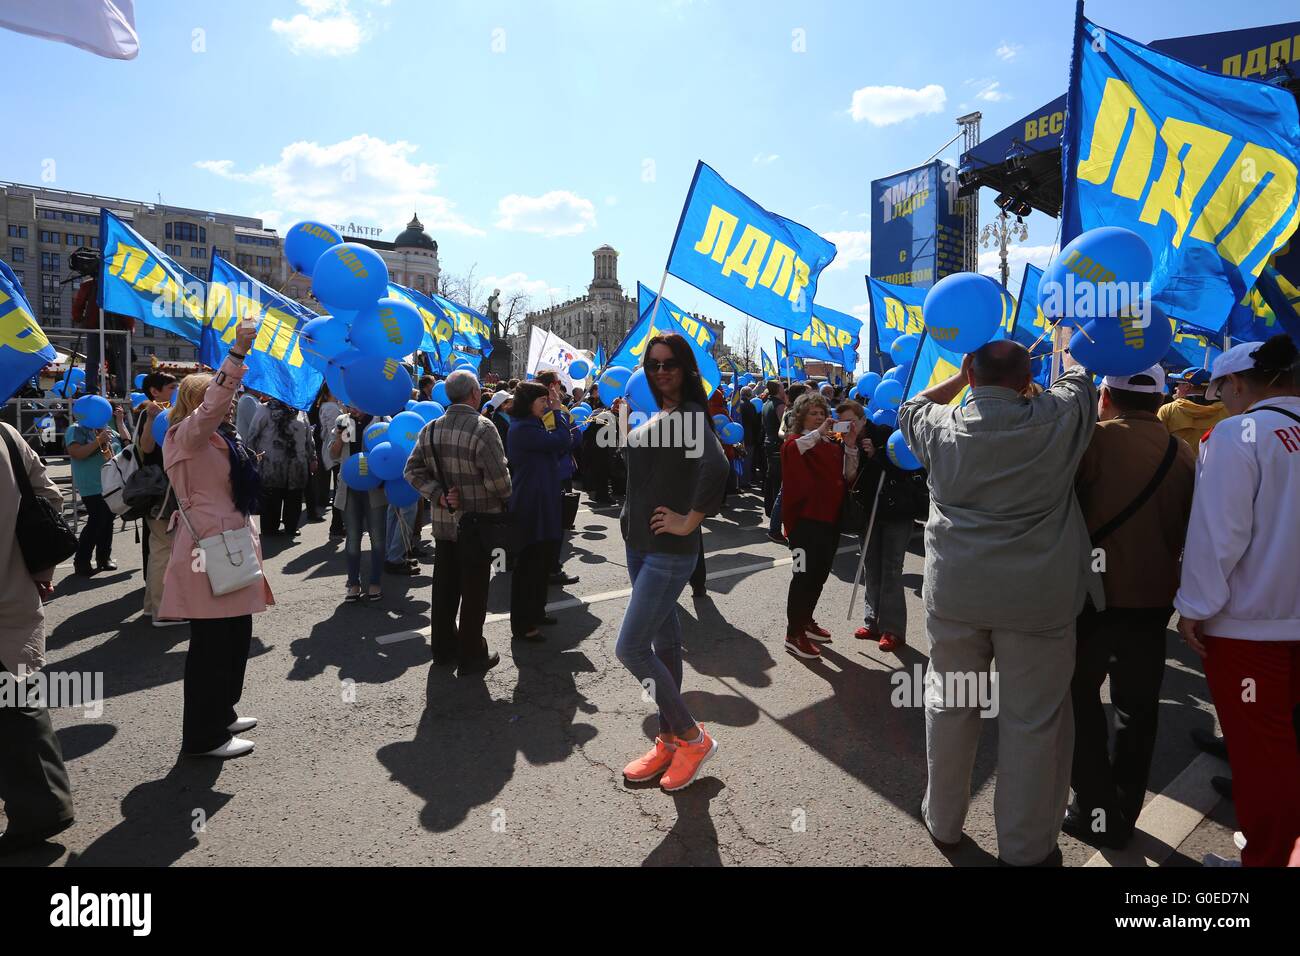 (160501) -- MOSCOW, May 1, 2016 (Xinhua) -- People attend labour day manifestation organized by Liberal-Democratic Party of Russia (LDPR) in Moscow, Russia, on May 1, 2016. (Xinhua/Evgeny Sinitsyn) Stock Photo